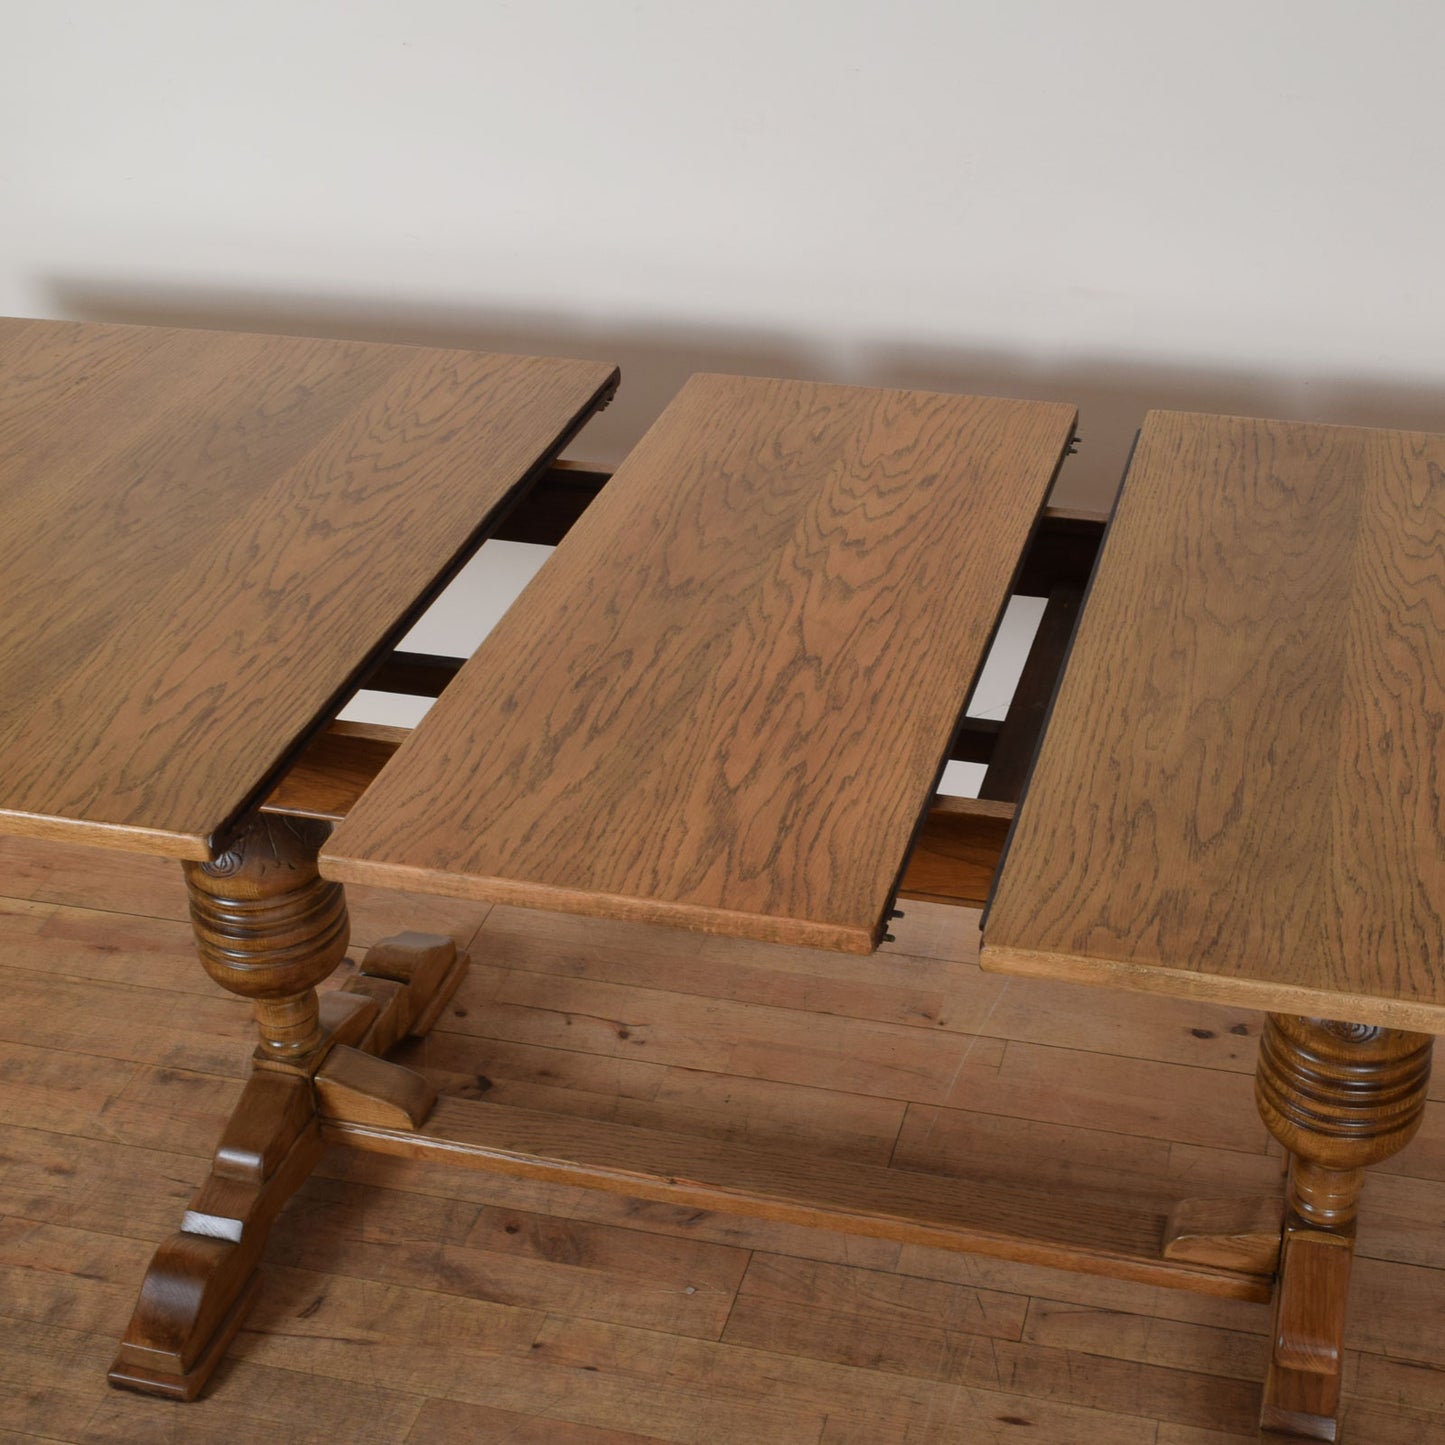 Extending Draw-Leaf Table and Six Chairs